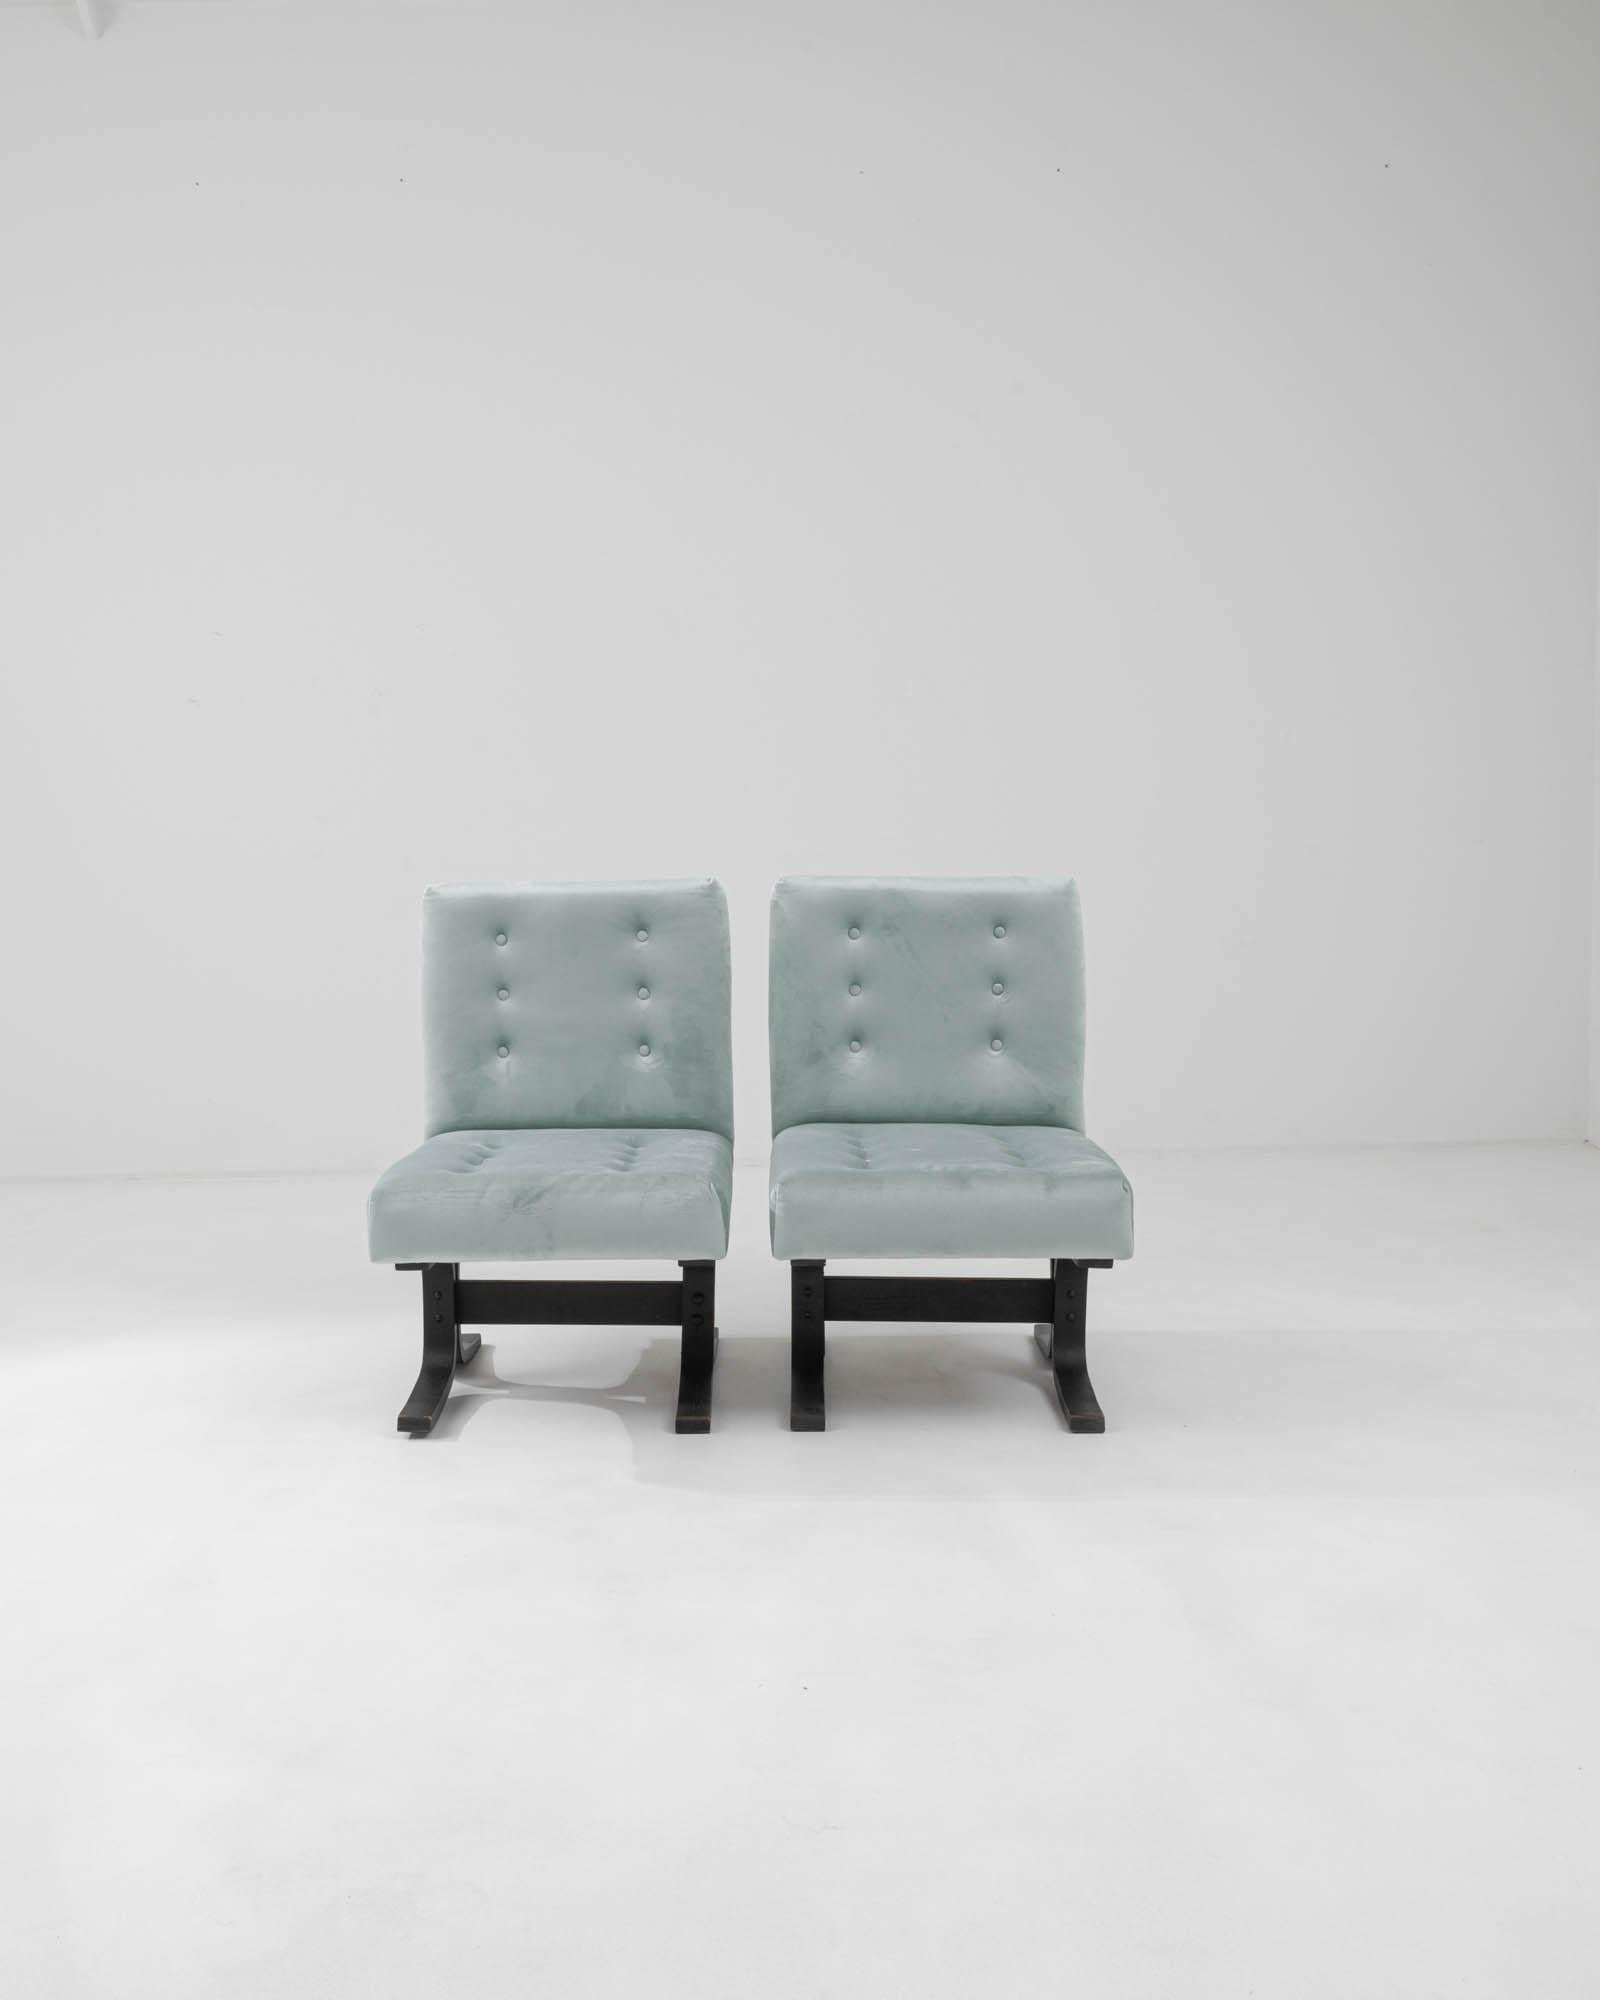 This antique set features two 1960s Czechia Upholstered Chairs by Ludvik Volak, epitomizing mid-century modern design. The soft, sky-blue hue of the upholstery exudes timeless elegance. Crafted with precision, the black stands, with a distinctive